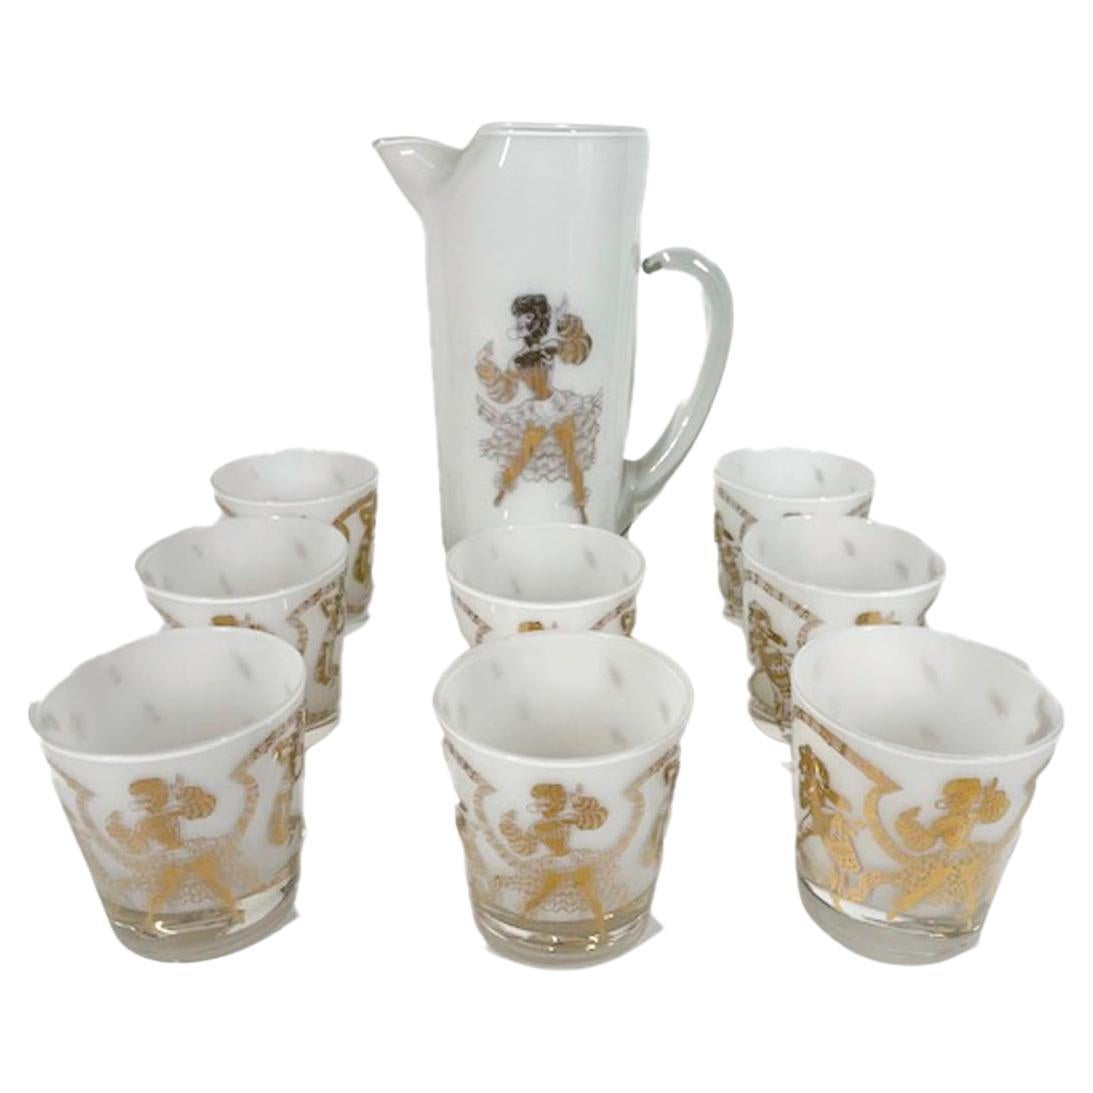 9 Piece Calypso Themed Cocktail Pitcher Set, Pitcher & 8 Old Fashioned Glasses For Sale